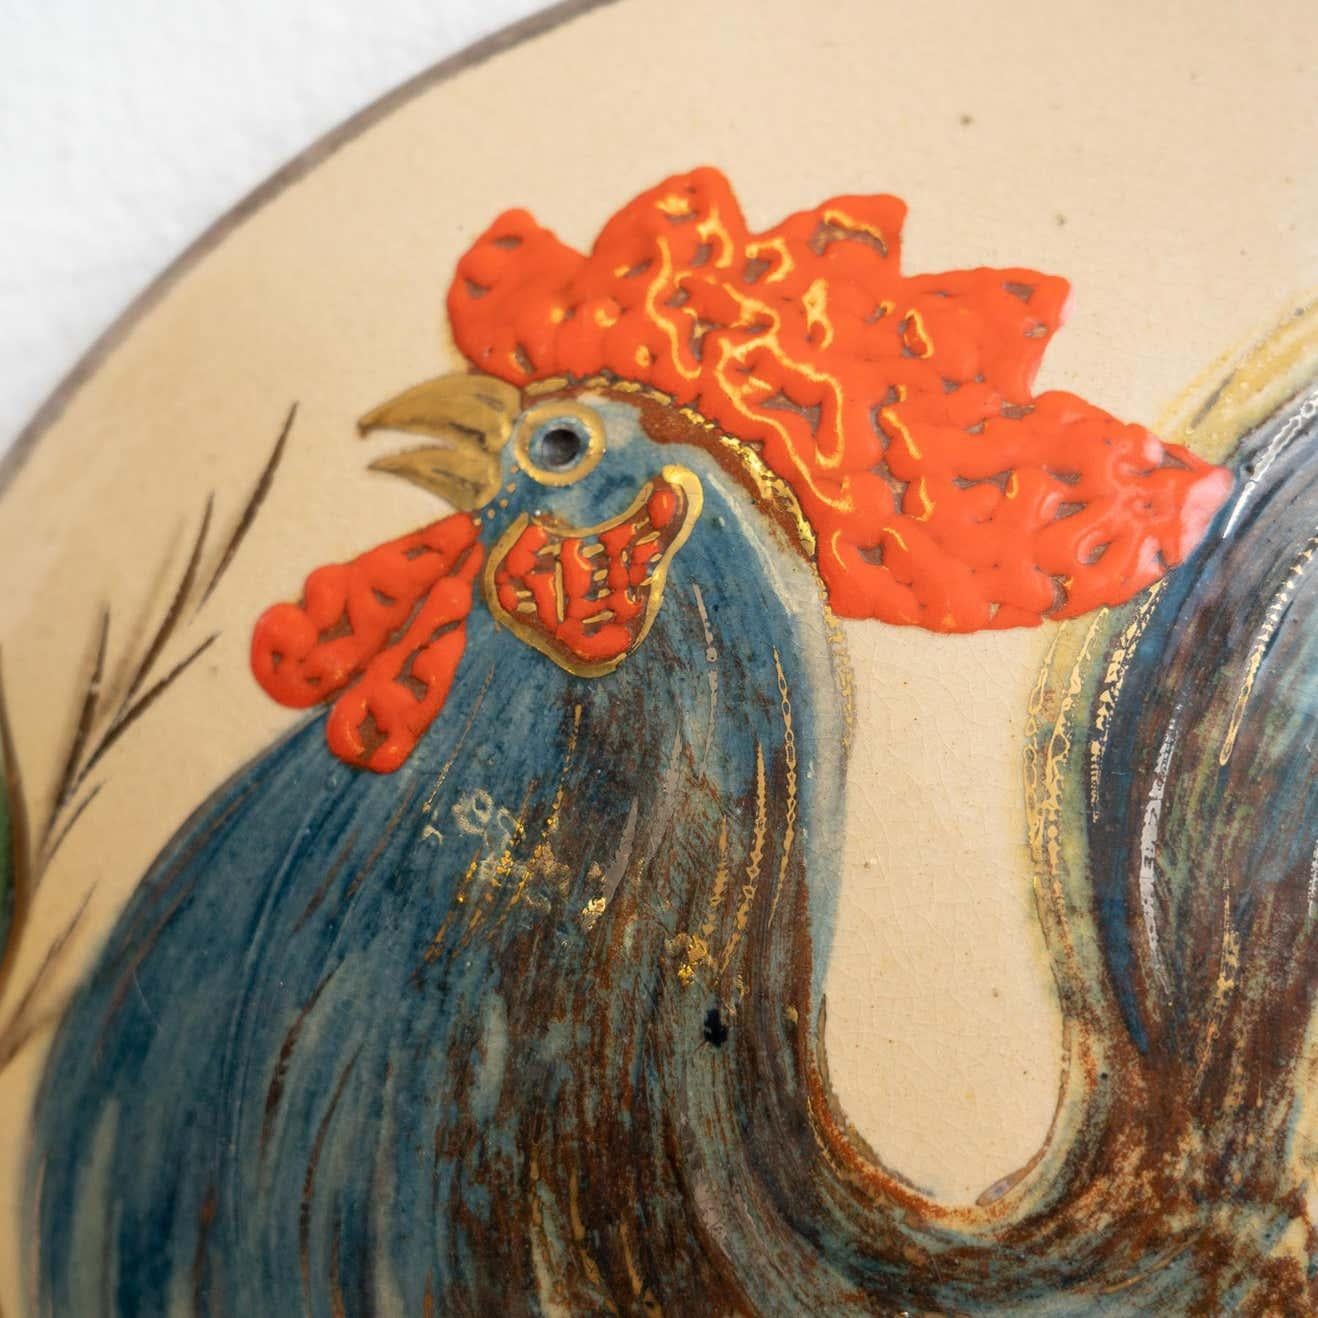 Spanish Ceramic Traditional Hand Painted Plate by Catalan Artist Diaz COSTA, circa 1960 For Sale